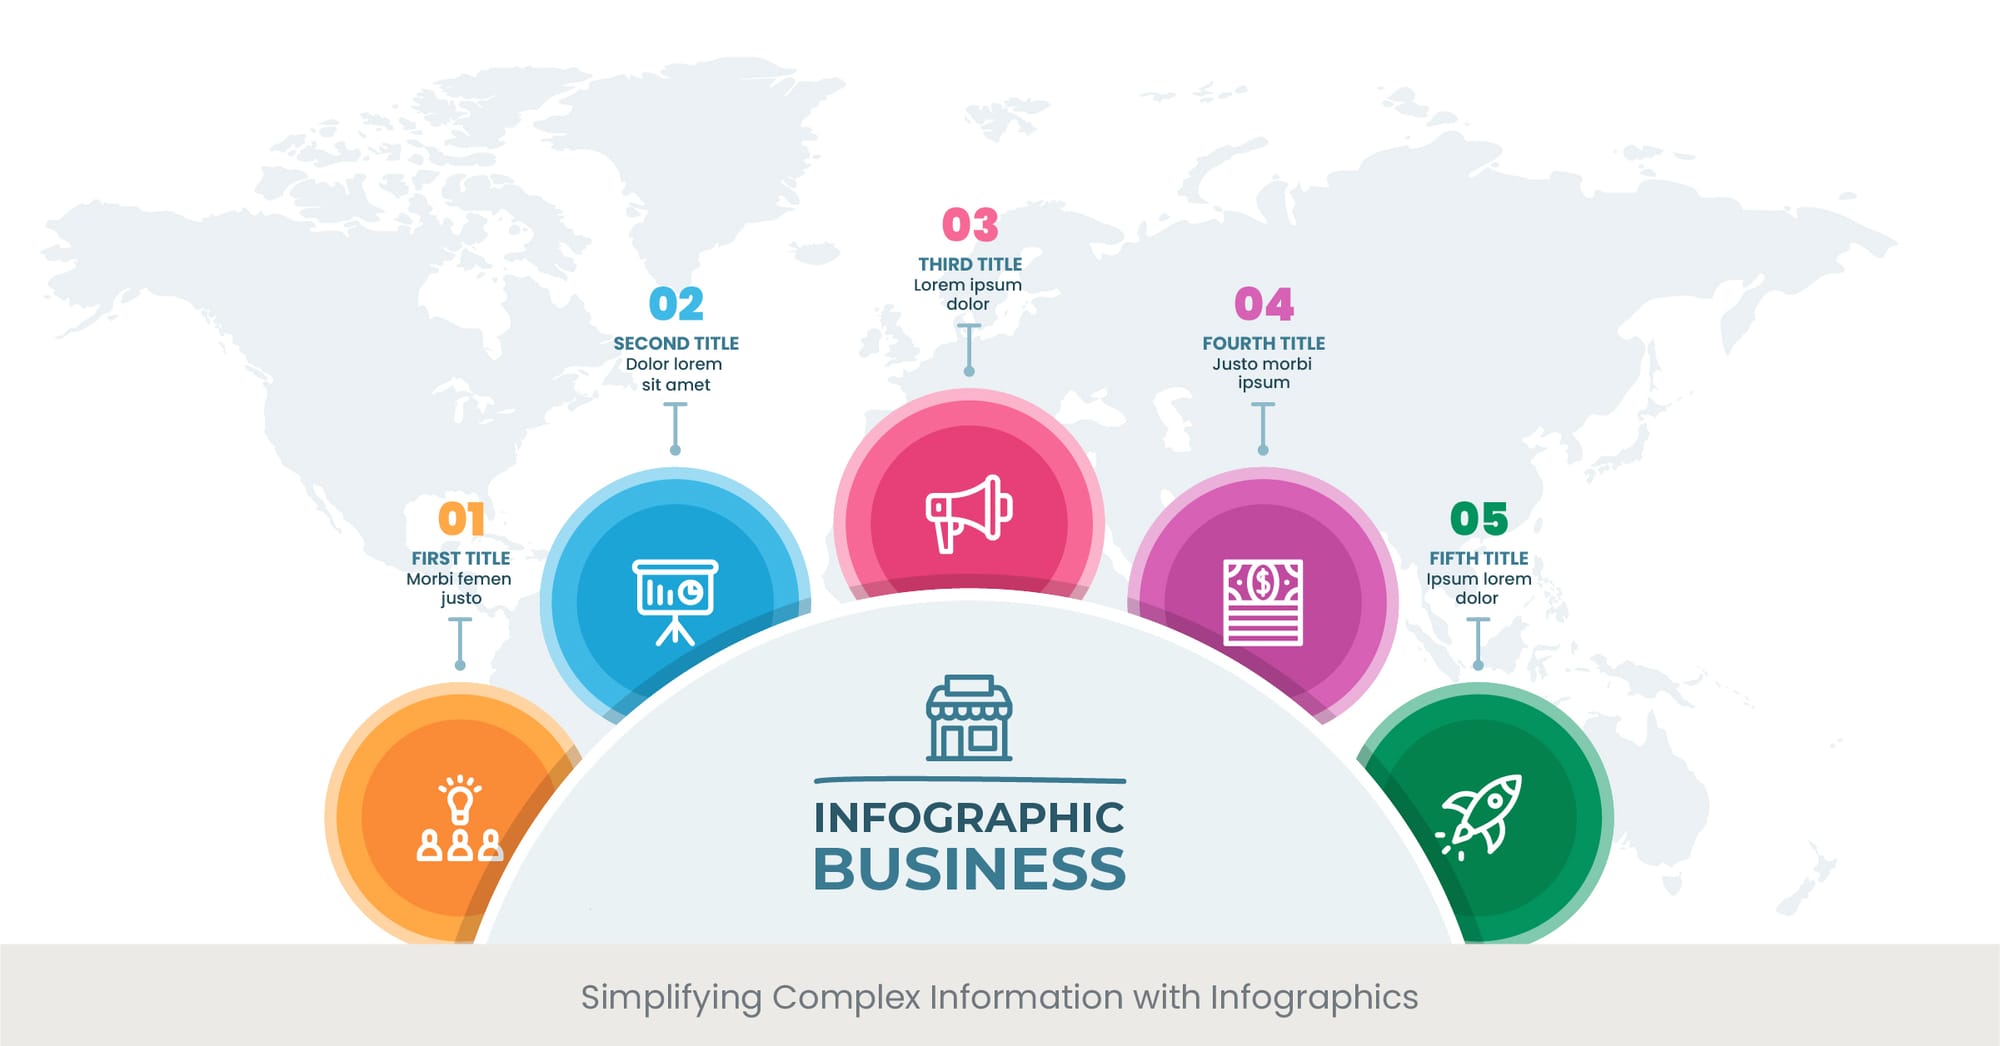 Simplifying Complex Information with Infographics